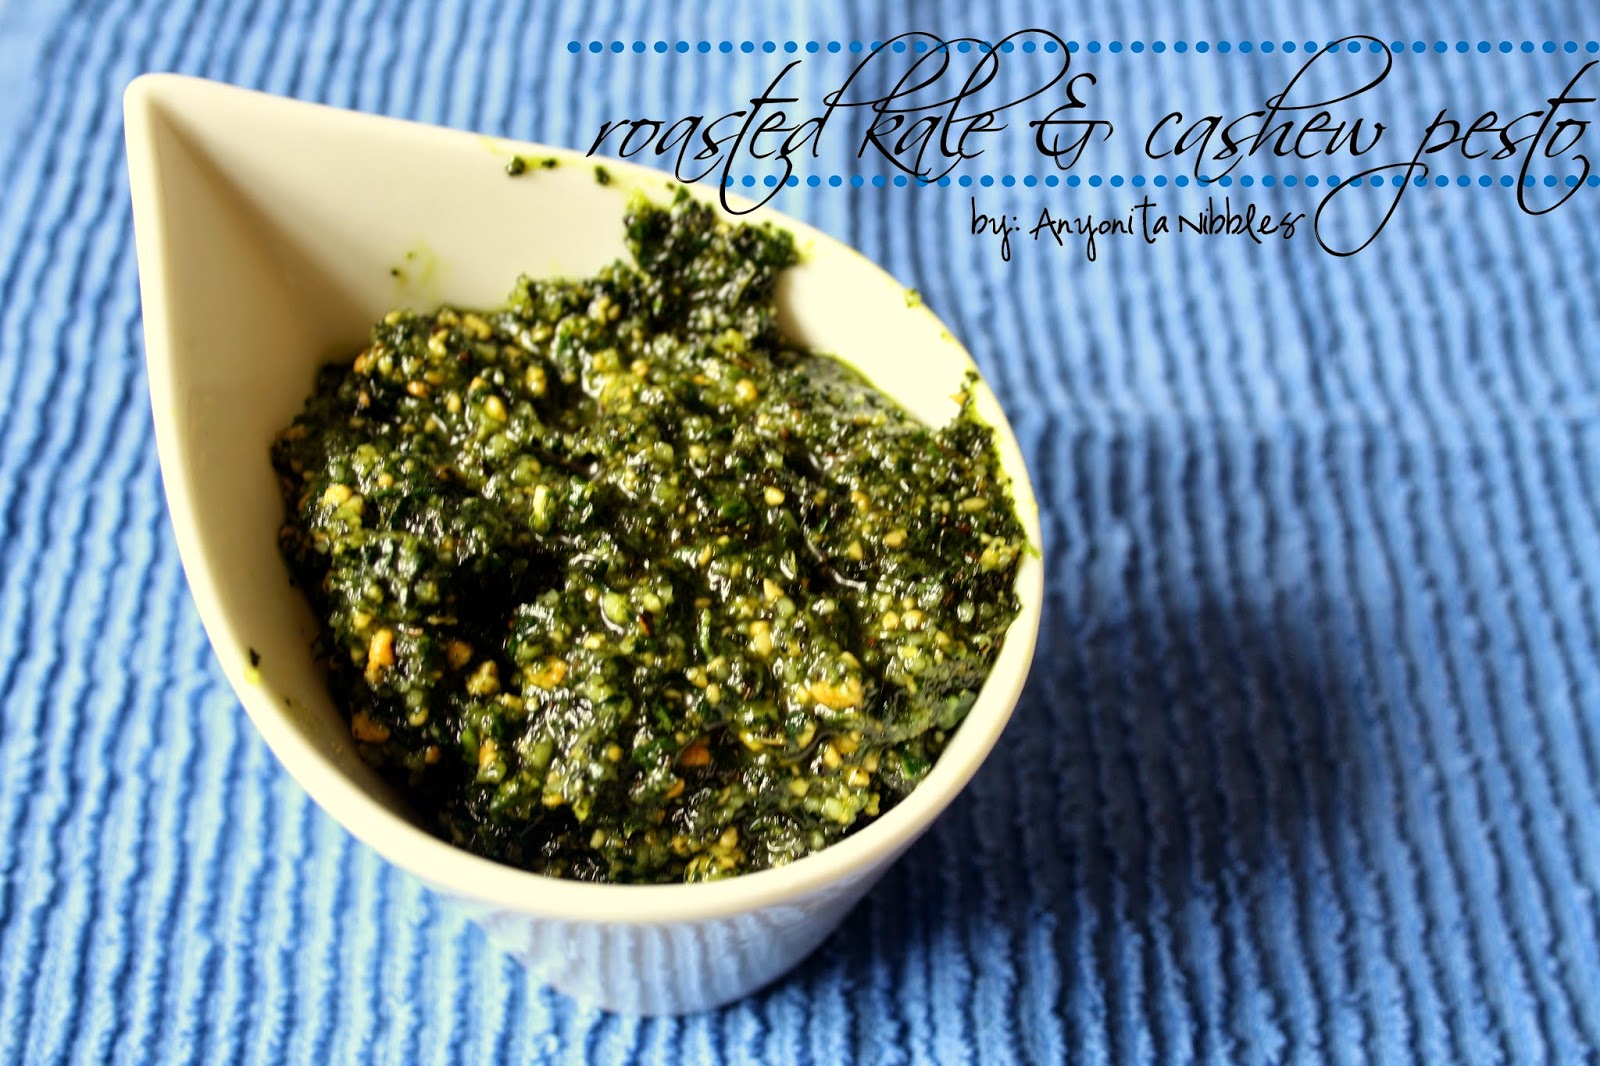 Using oven roasted kale and salted cashews, this quick pesto is made in the food processor.